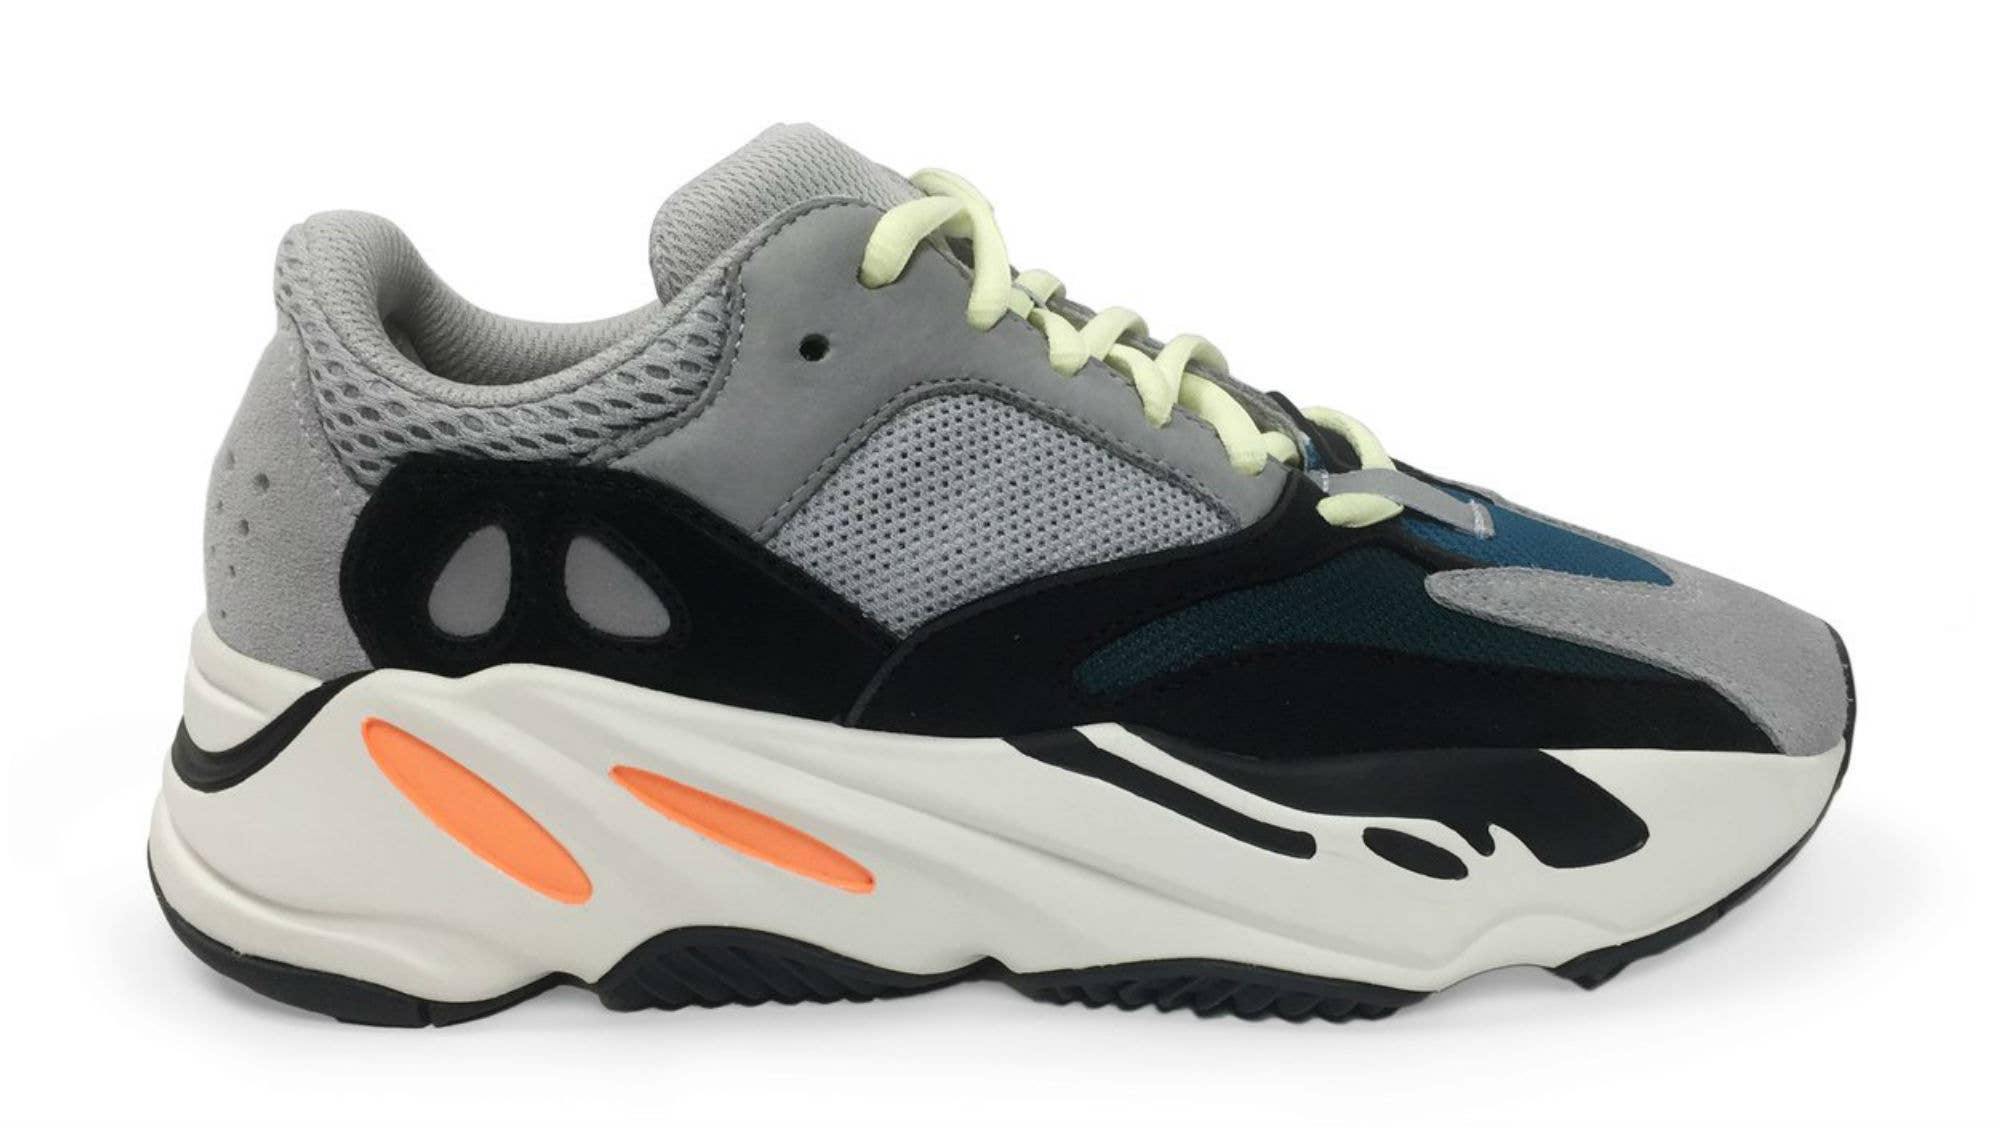 Adidas Yeezy Boost 700 Wave Runner Solid Grey Chalk White Core Black B75571 Release Date